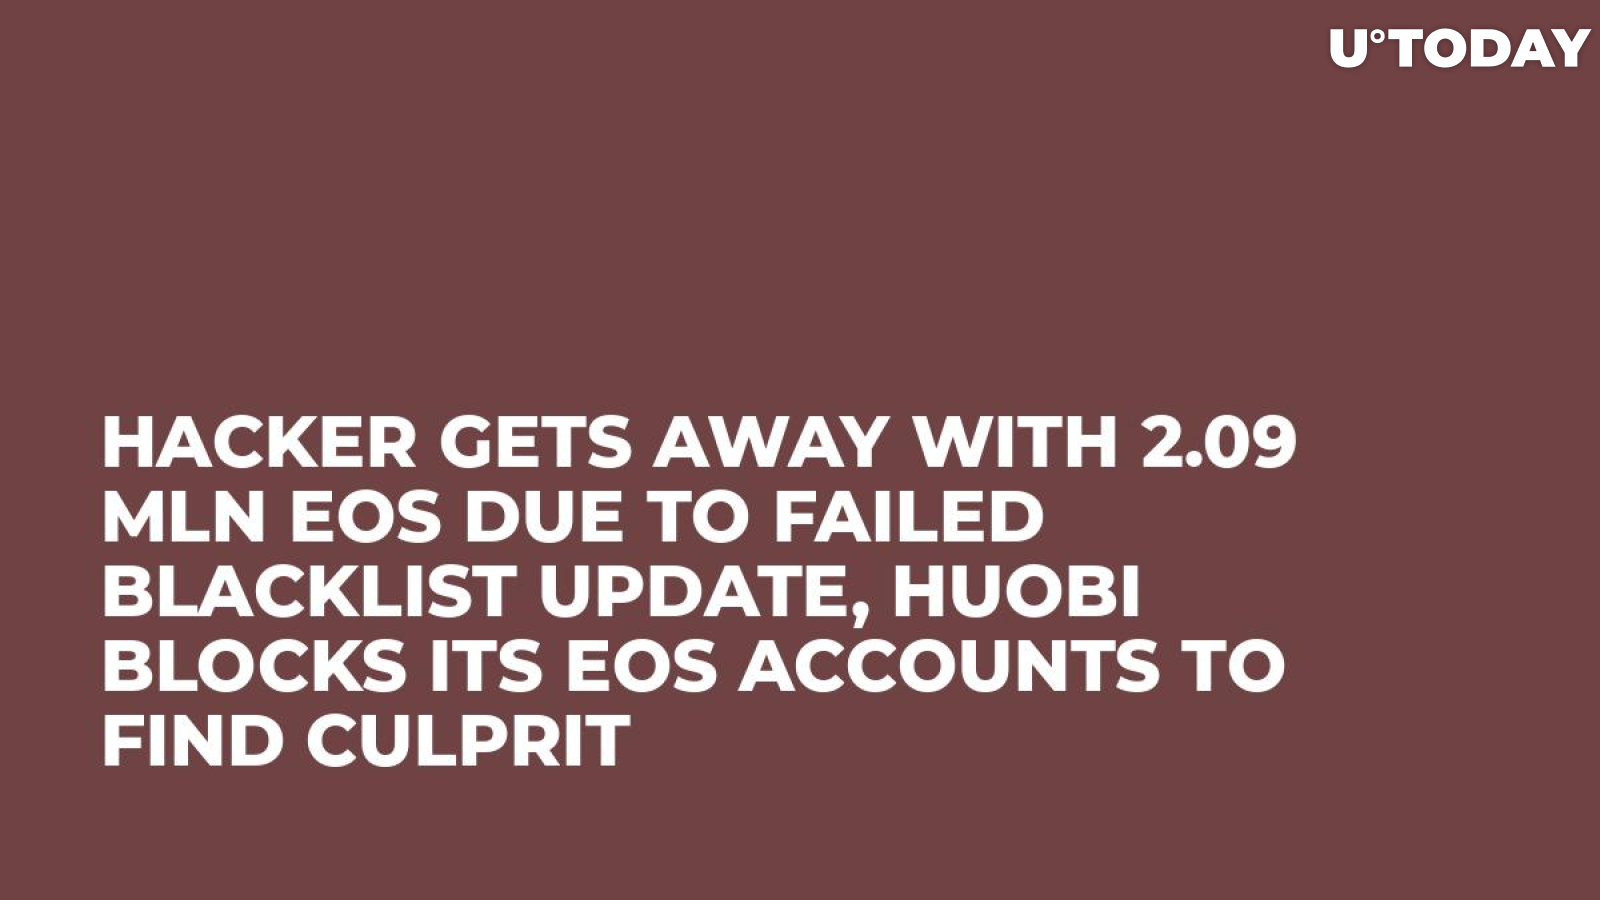 Hacker Gets Away with 2.09 Mln EOS Due to Failed Blacklist Update, Huobi Blocks Its EOS Accounts to Find Culprit